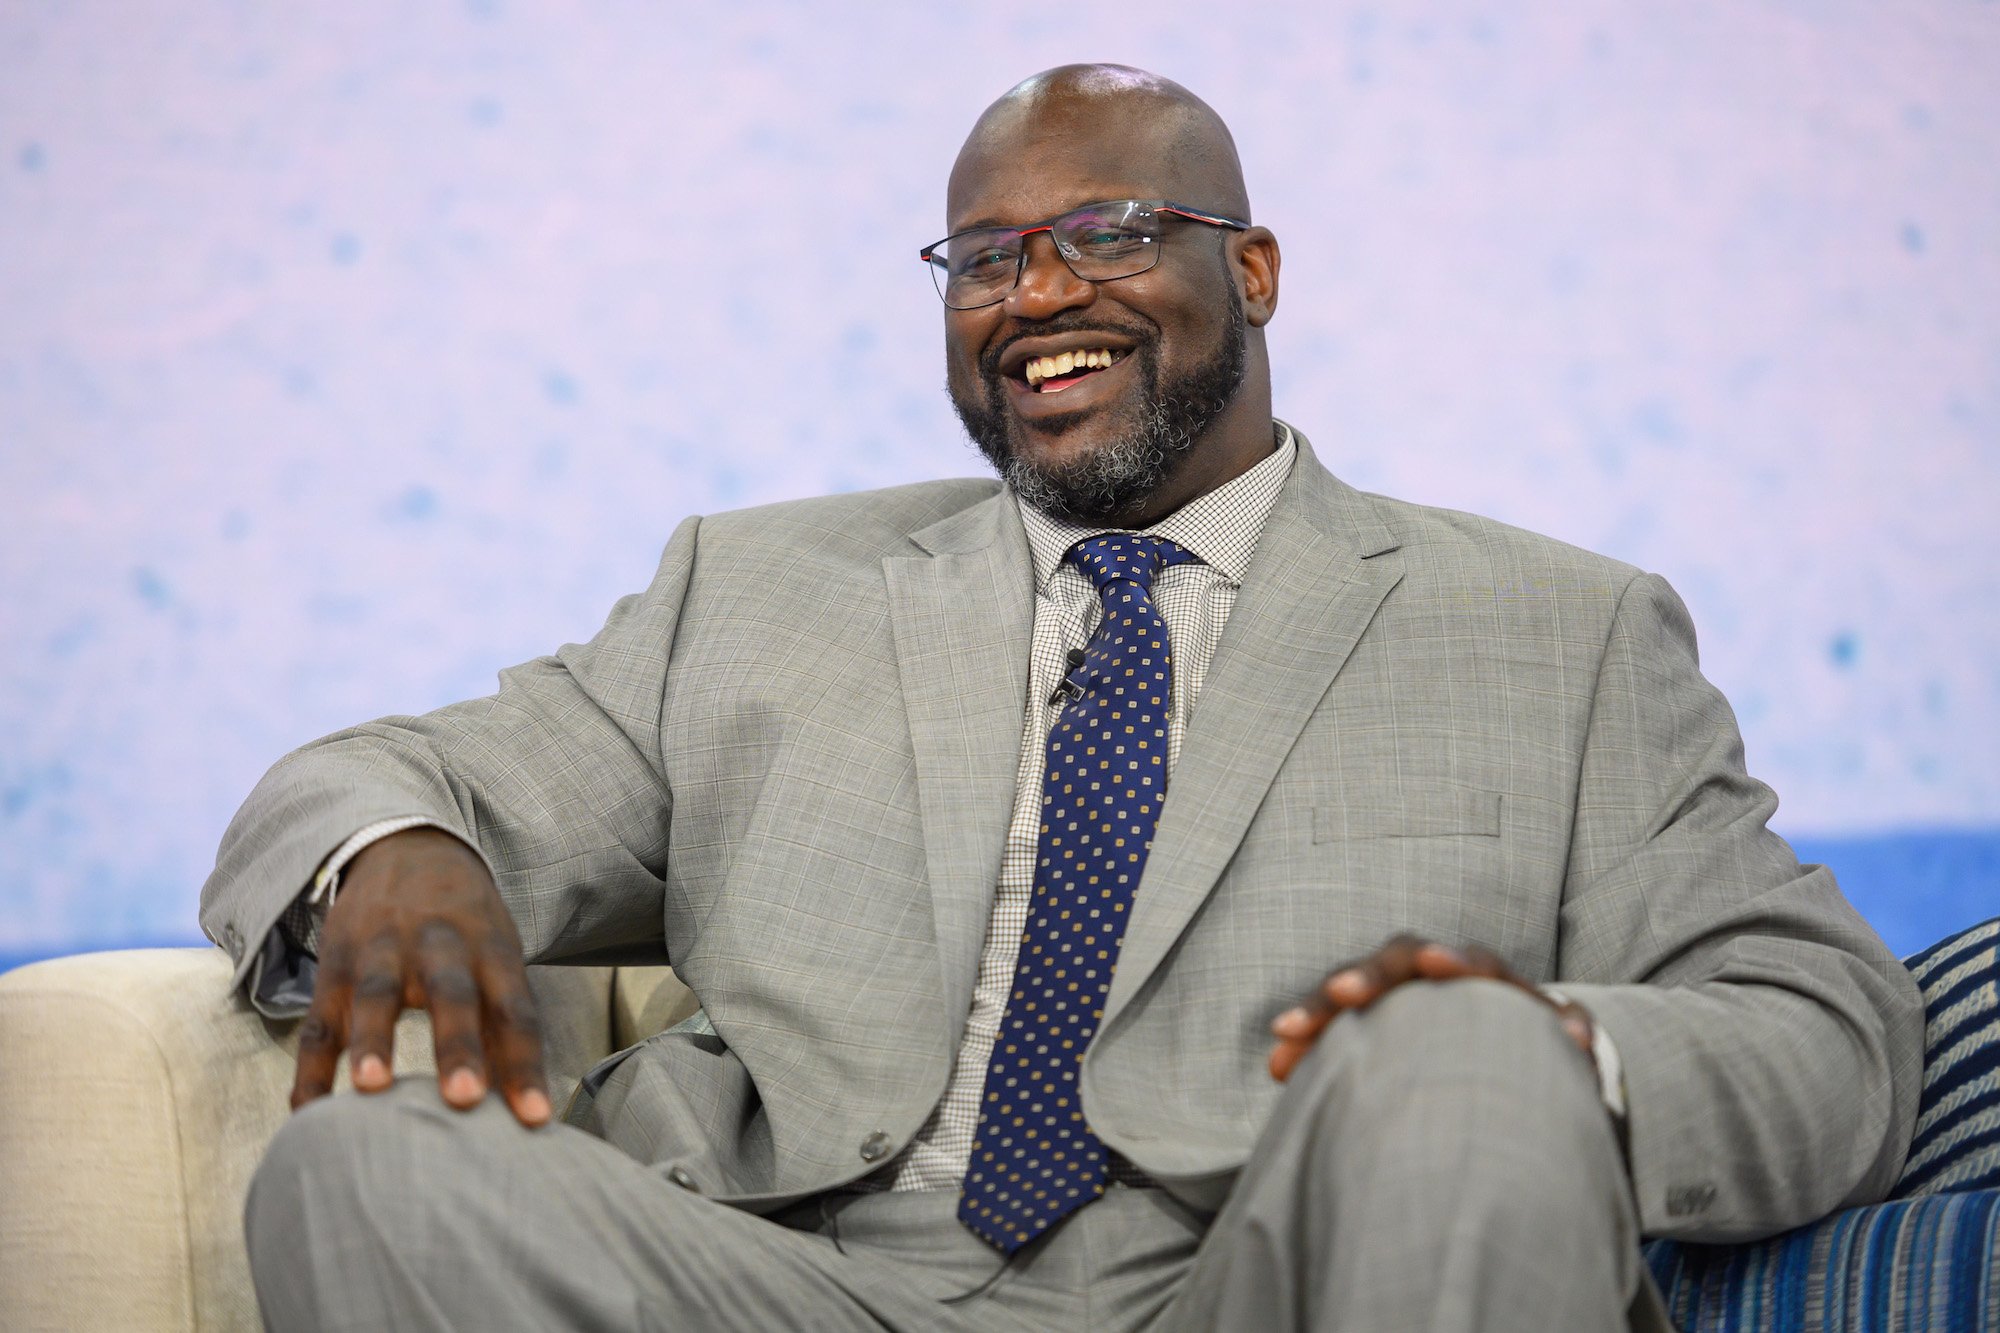 Shaquille O'Neal smiling, sitting down, in front of a white background